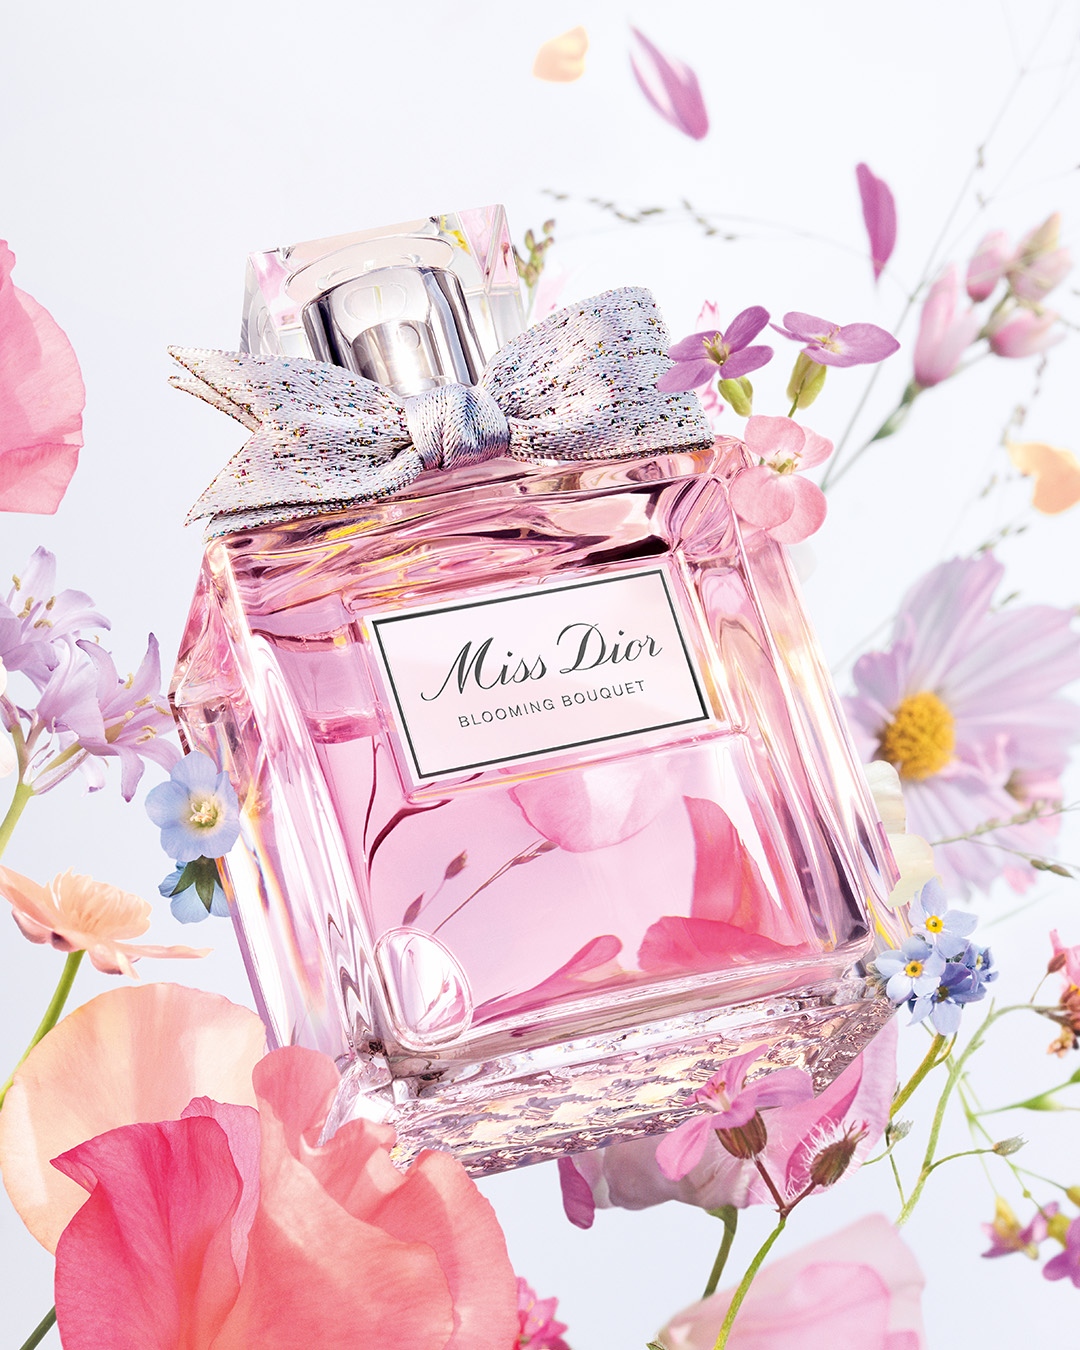 Dior on X: Let tenderness blossom. #MissDior Blooming Bouquet is a floral  composition delicately wrapped in a veil of shimmering white musks like a  soft and tender bouquet of newly bloomed flowers. #